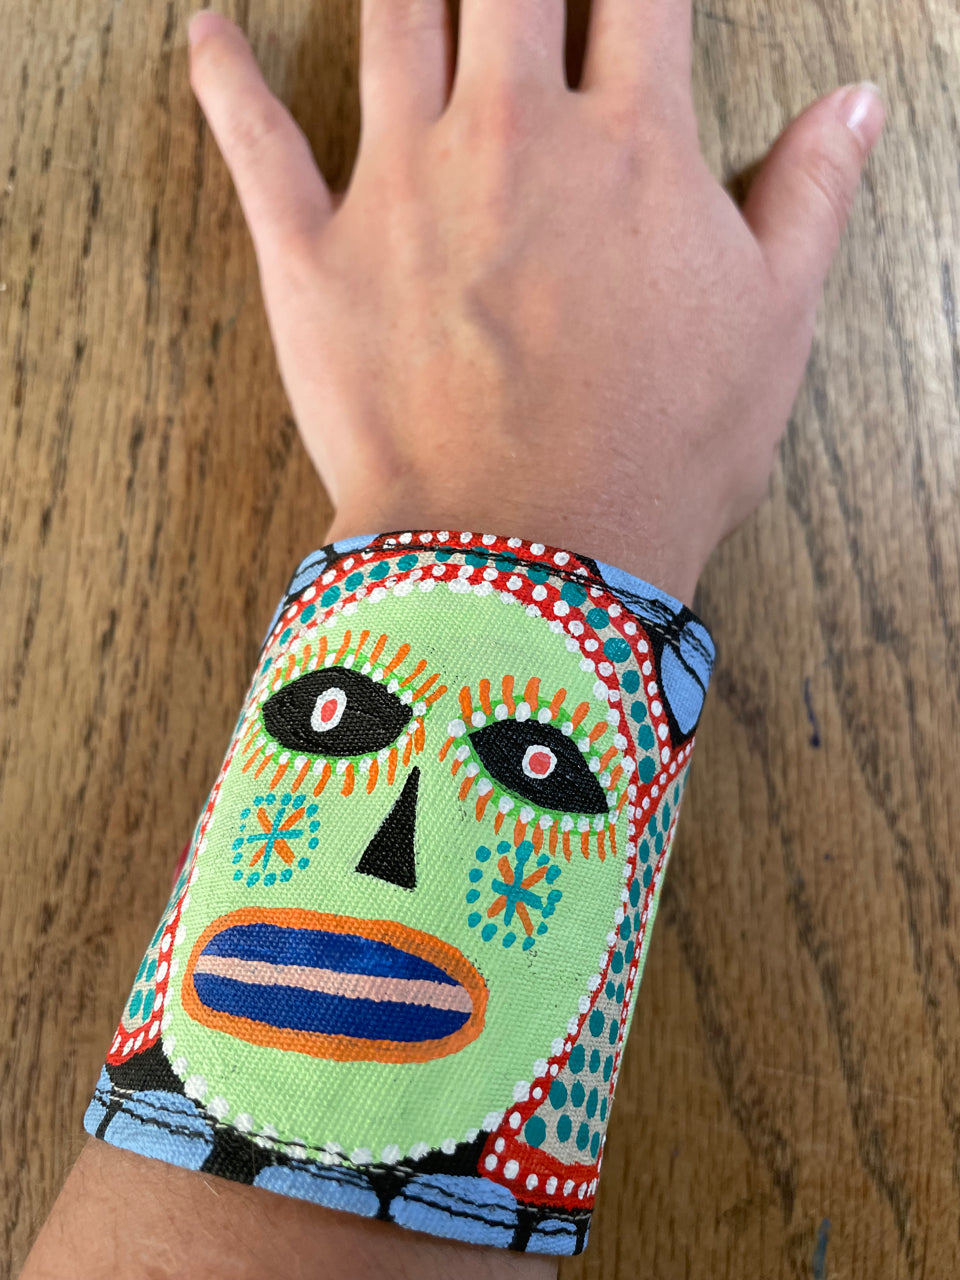 Wrist-Cuff / one-of-a-kind / hand-painted